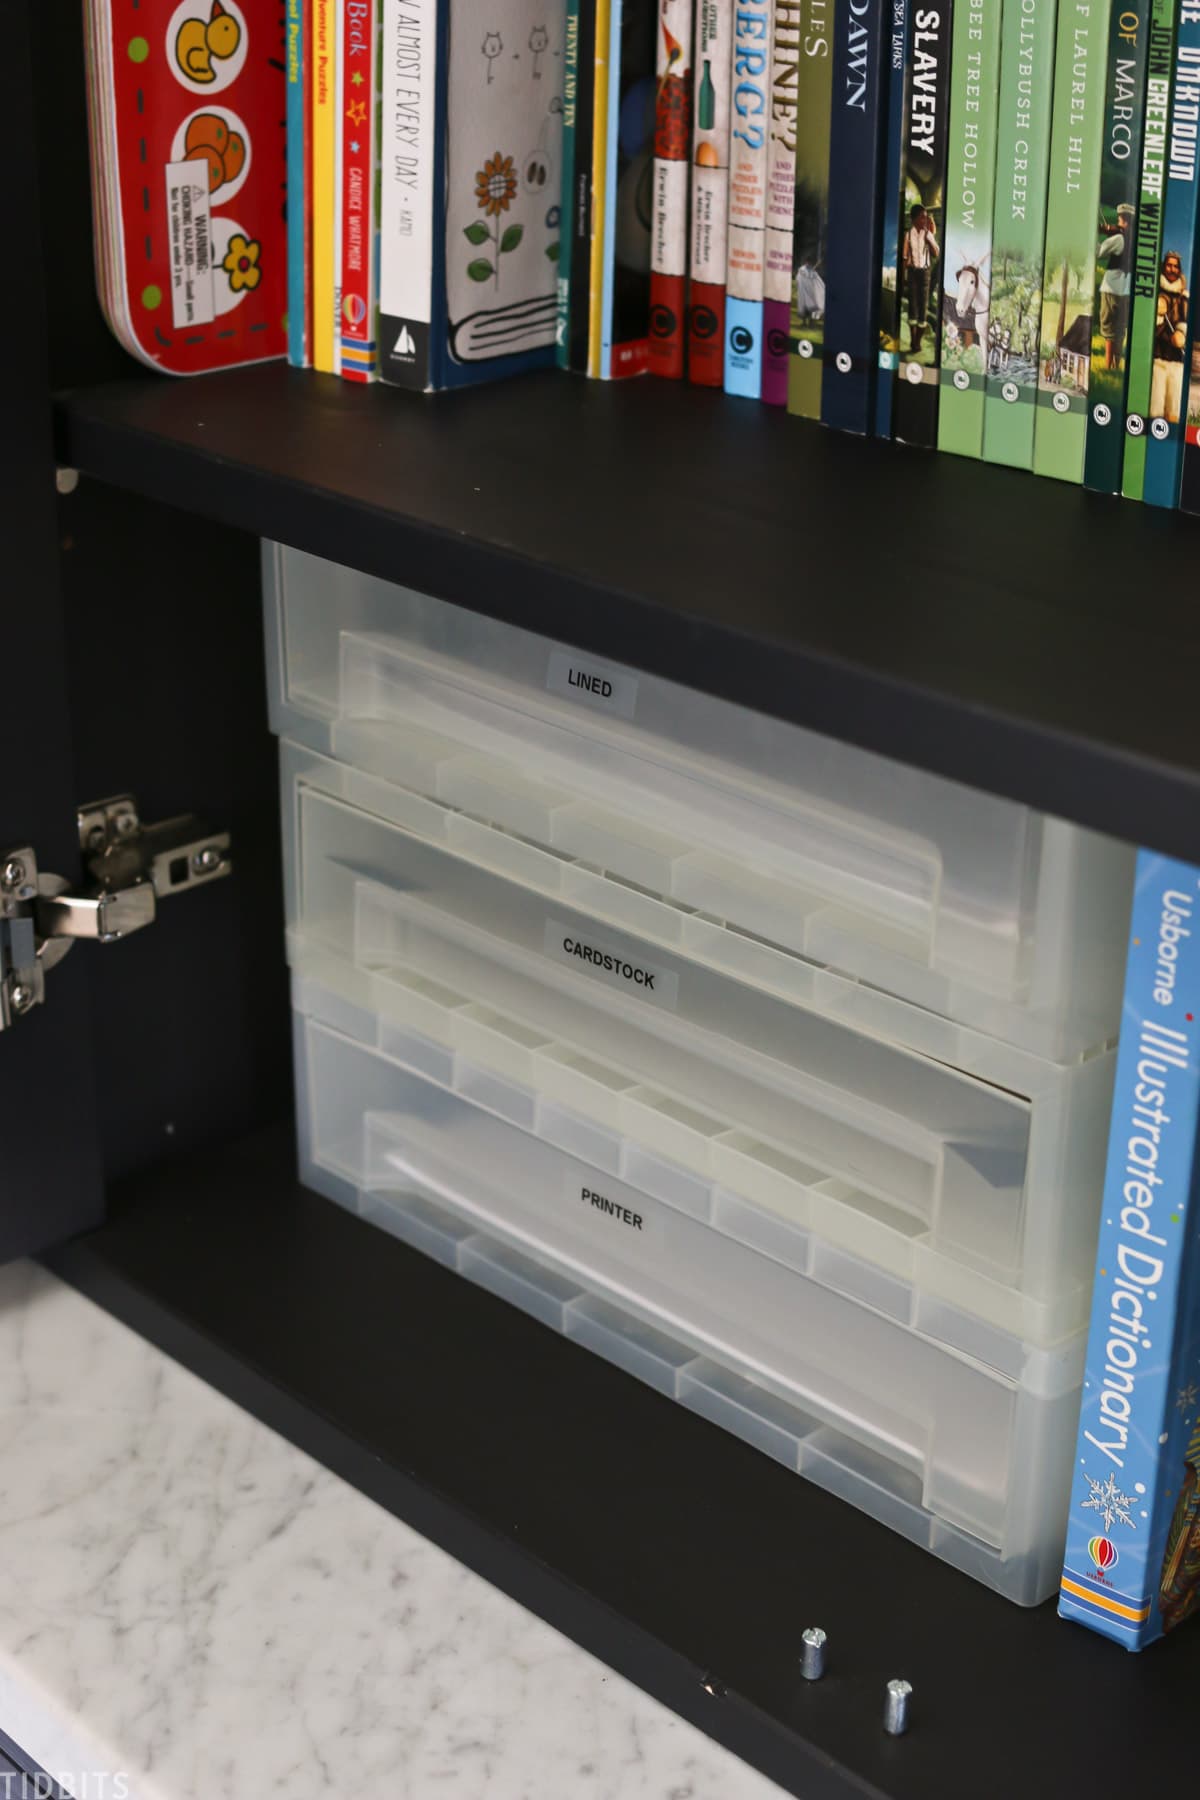 lower storage cabinet shows organizers for cardstocks and printed papers